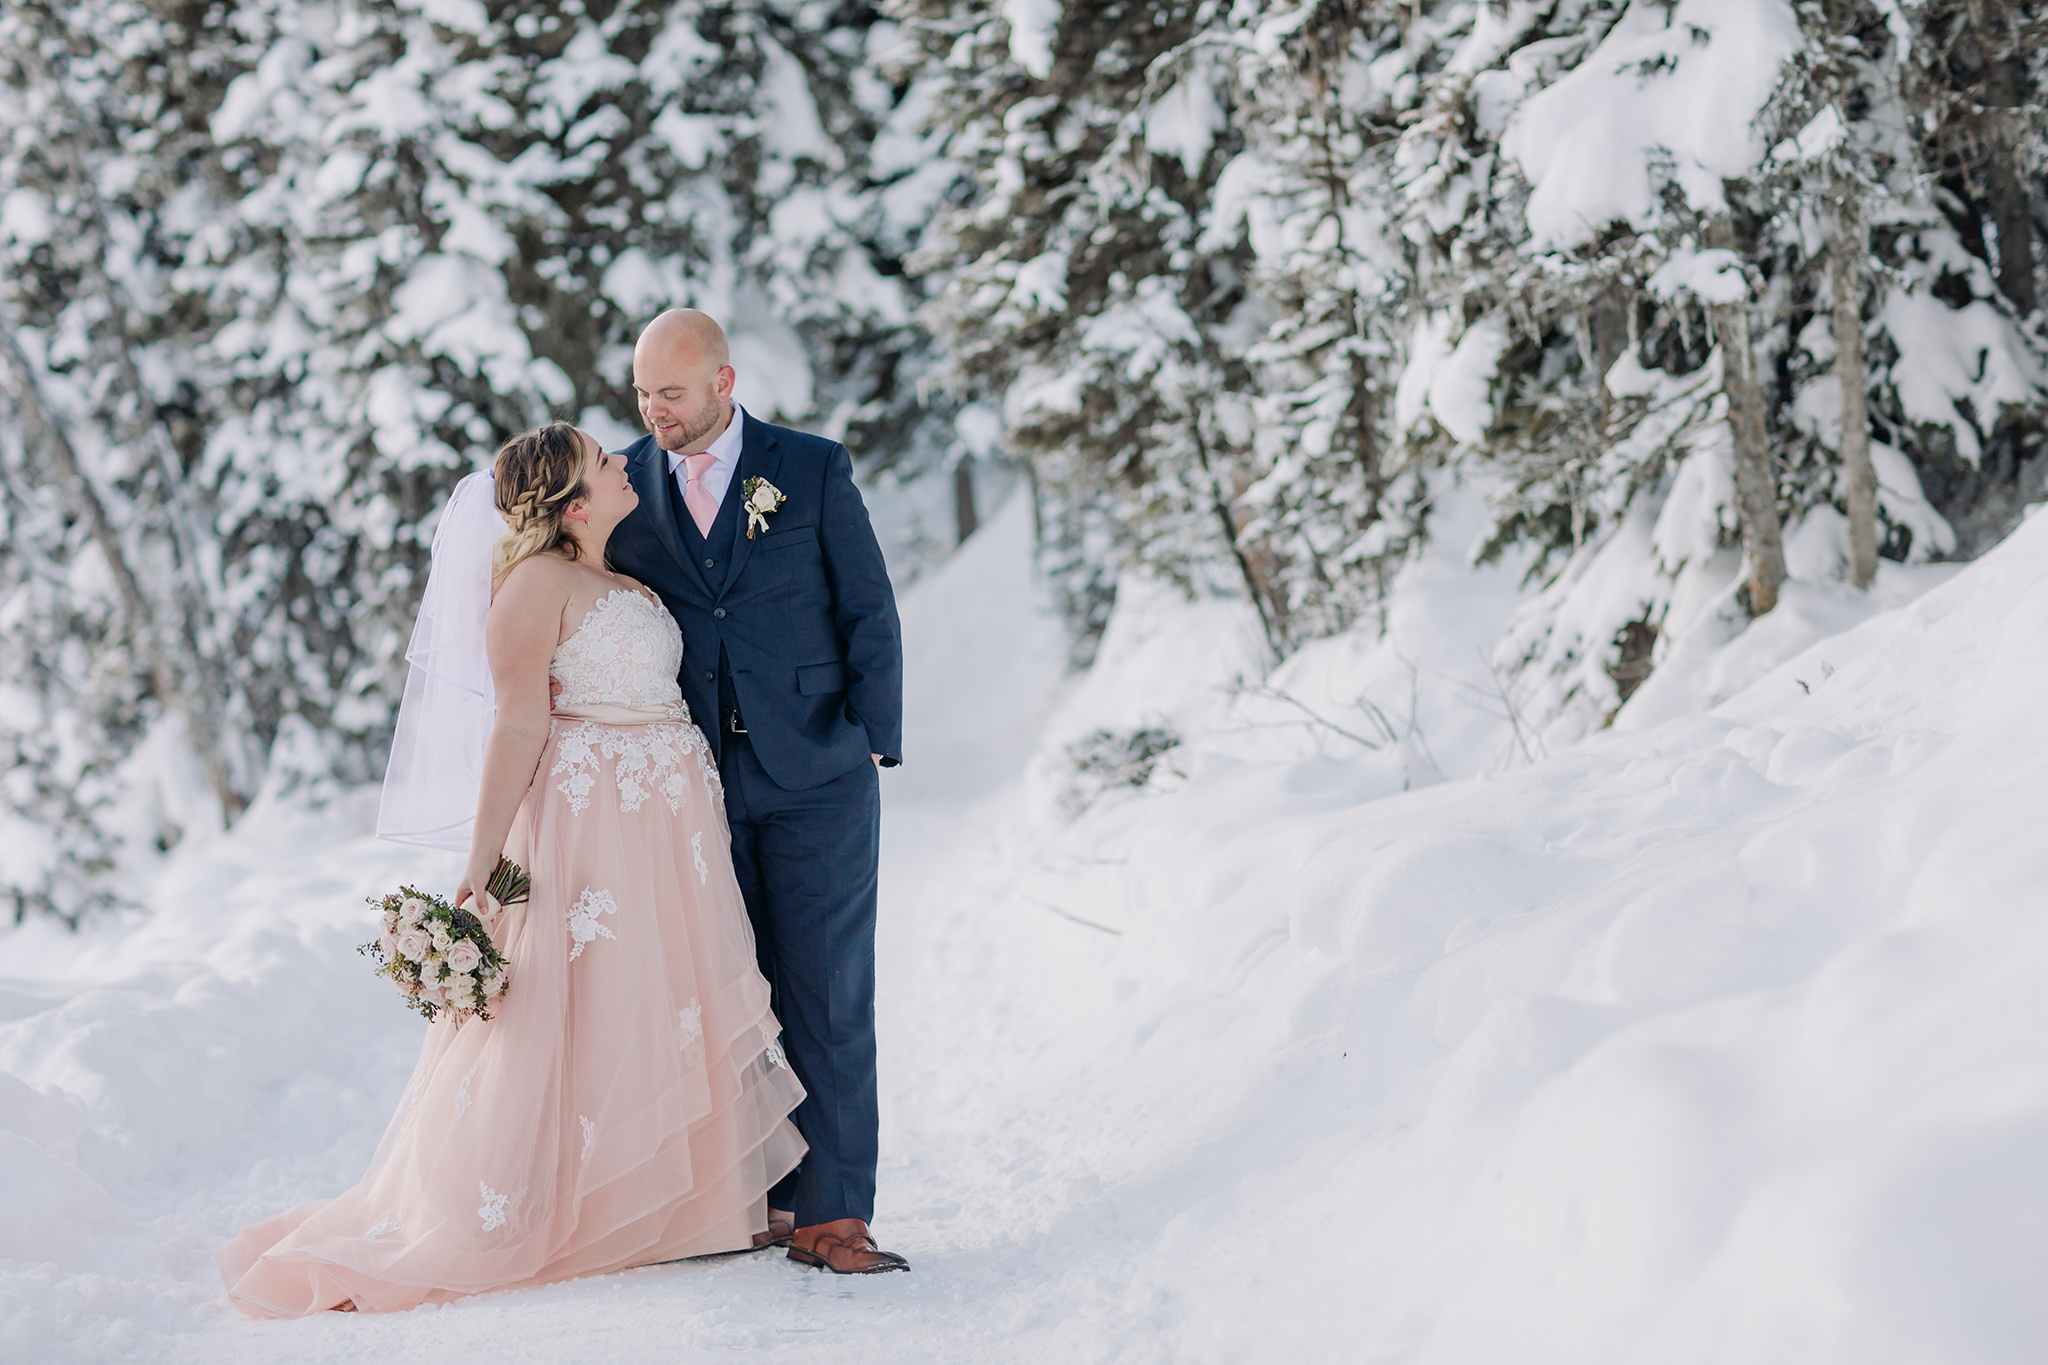 Lake Louise winter elopement on frozen Lake Louise with Bride in pink wedding dress in winter wonderland Super snowy elopement wedding photographed by ENV Photography on Bow Valley Parkway